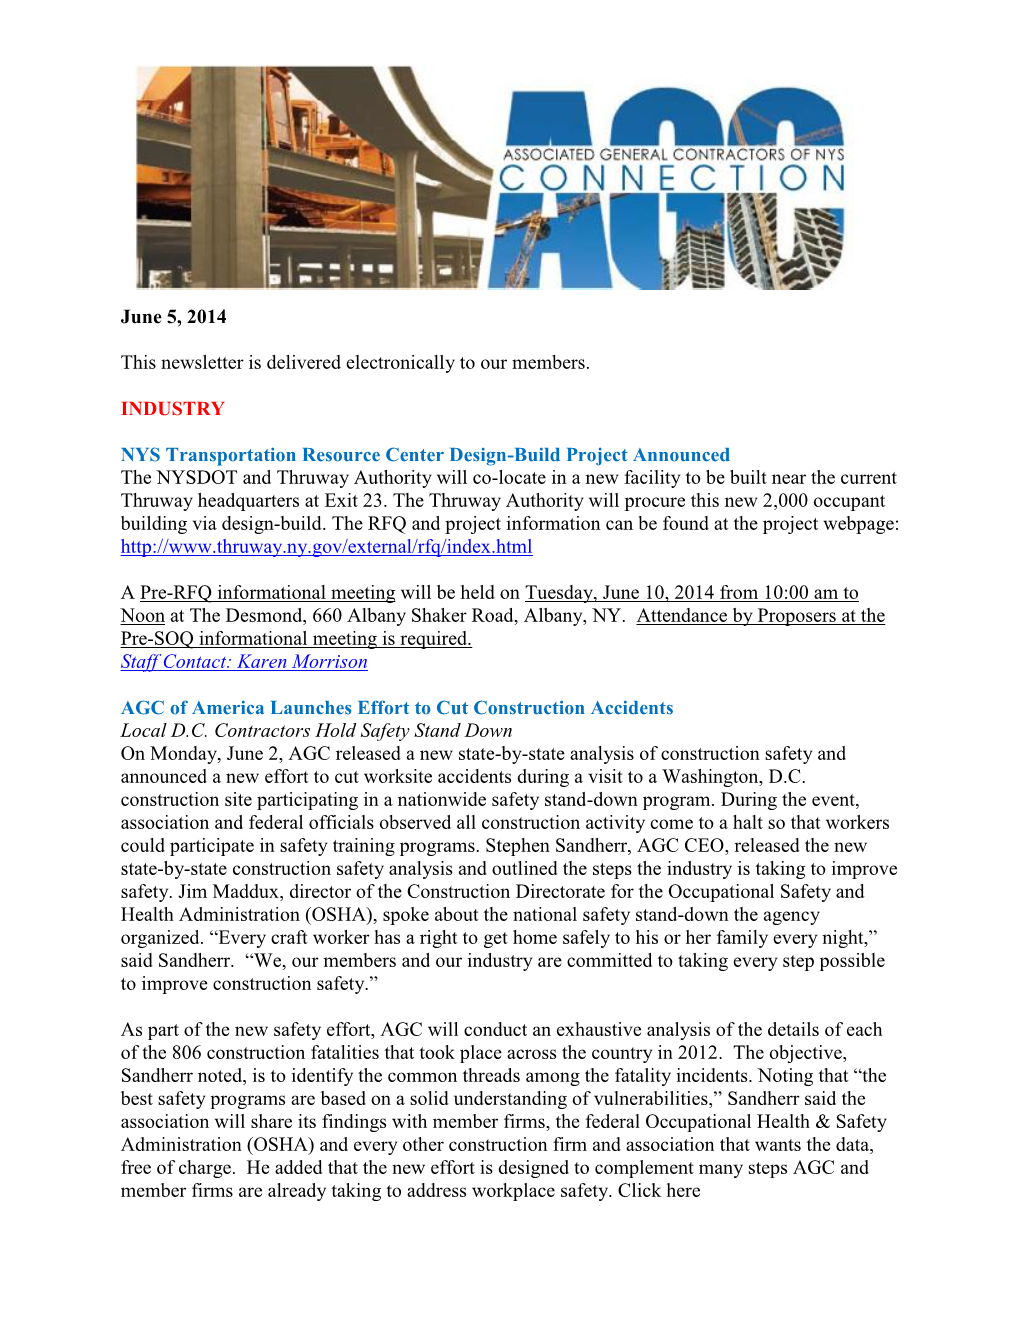 June 5, 2014 This Newsletter Is Delivered Electronically to Our